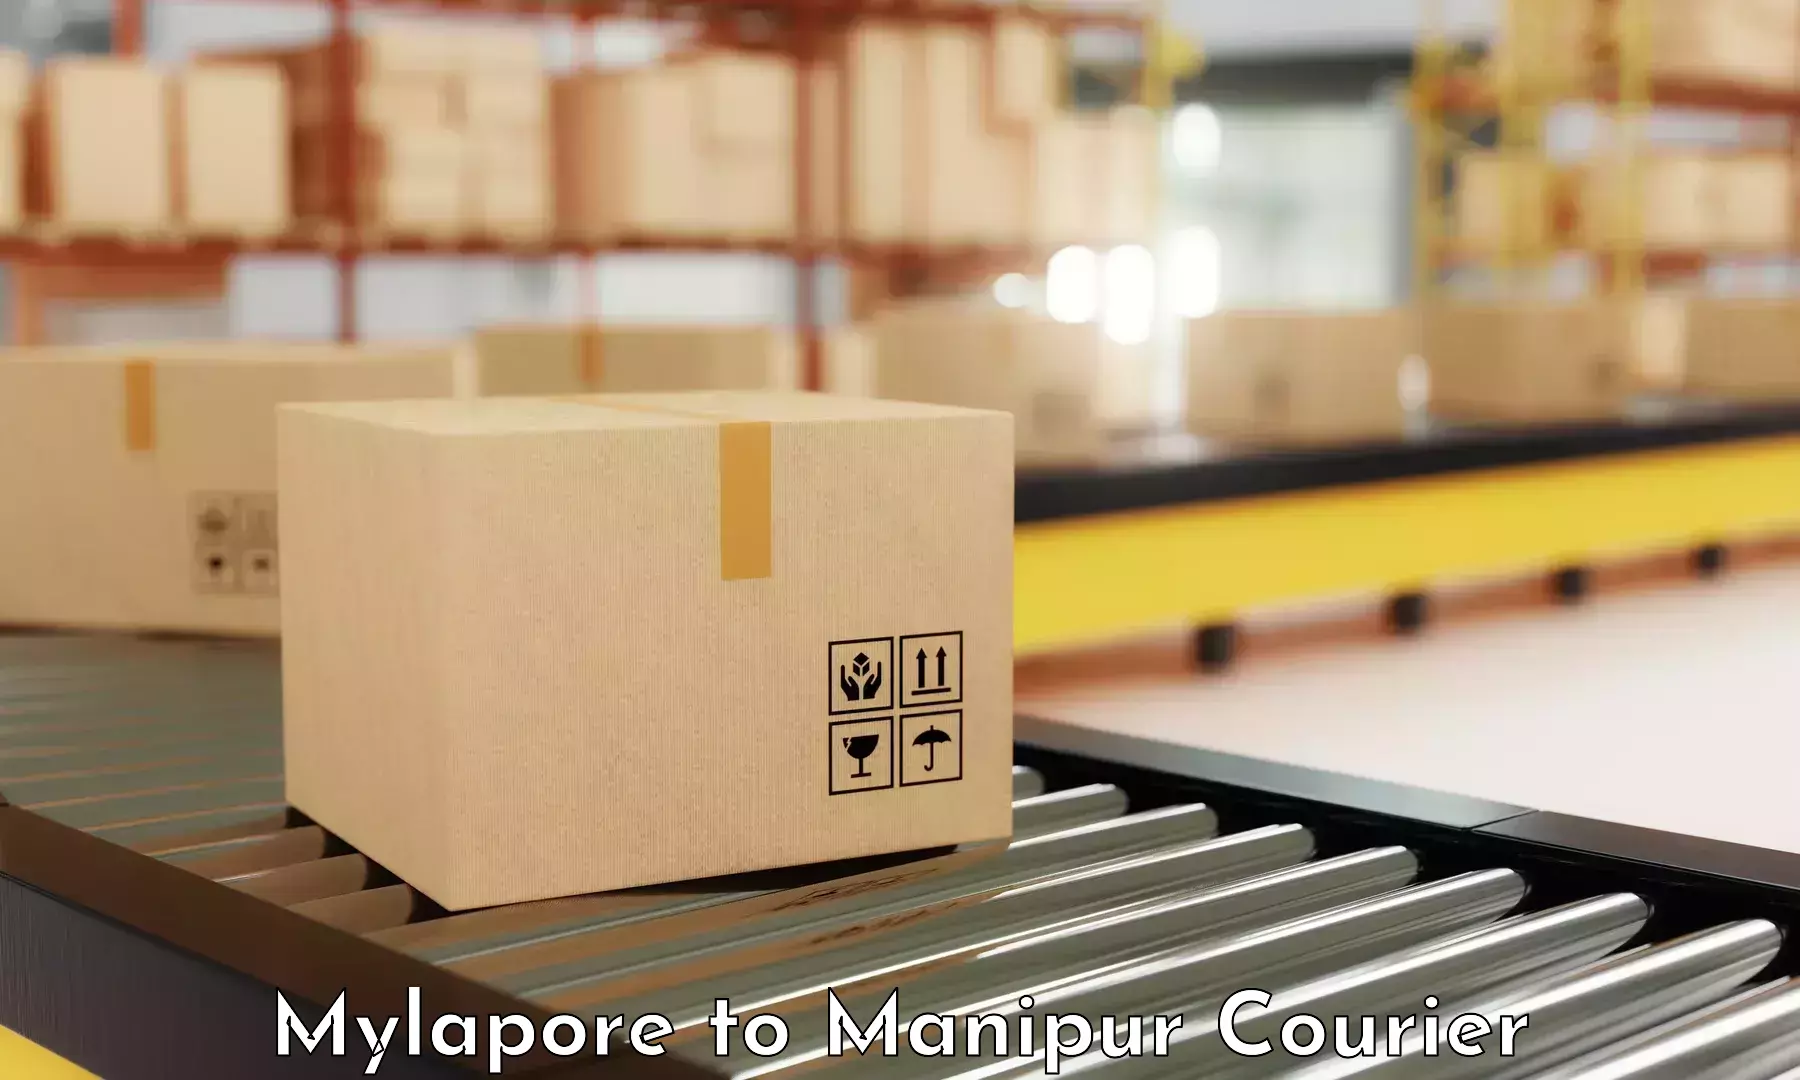 User-friendly courier app Mylapore to Moirang